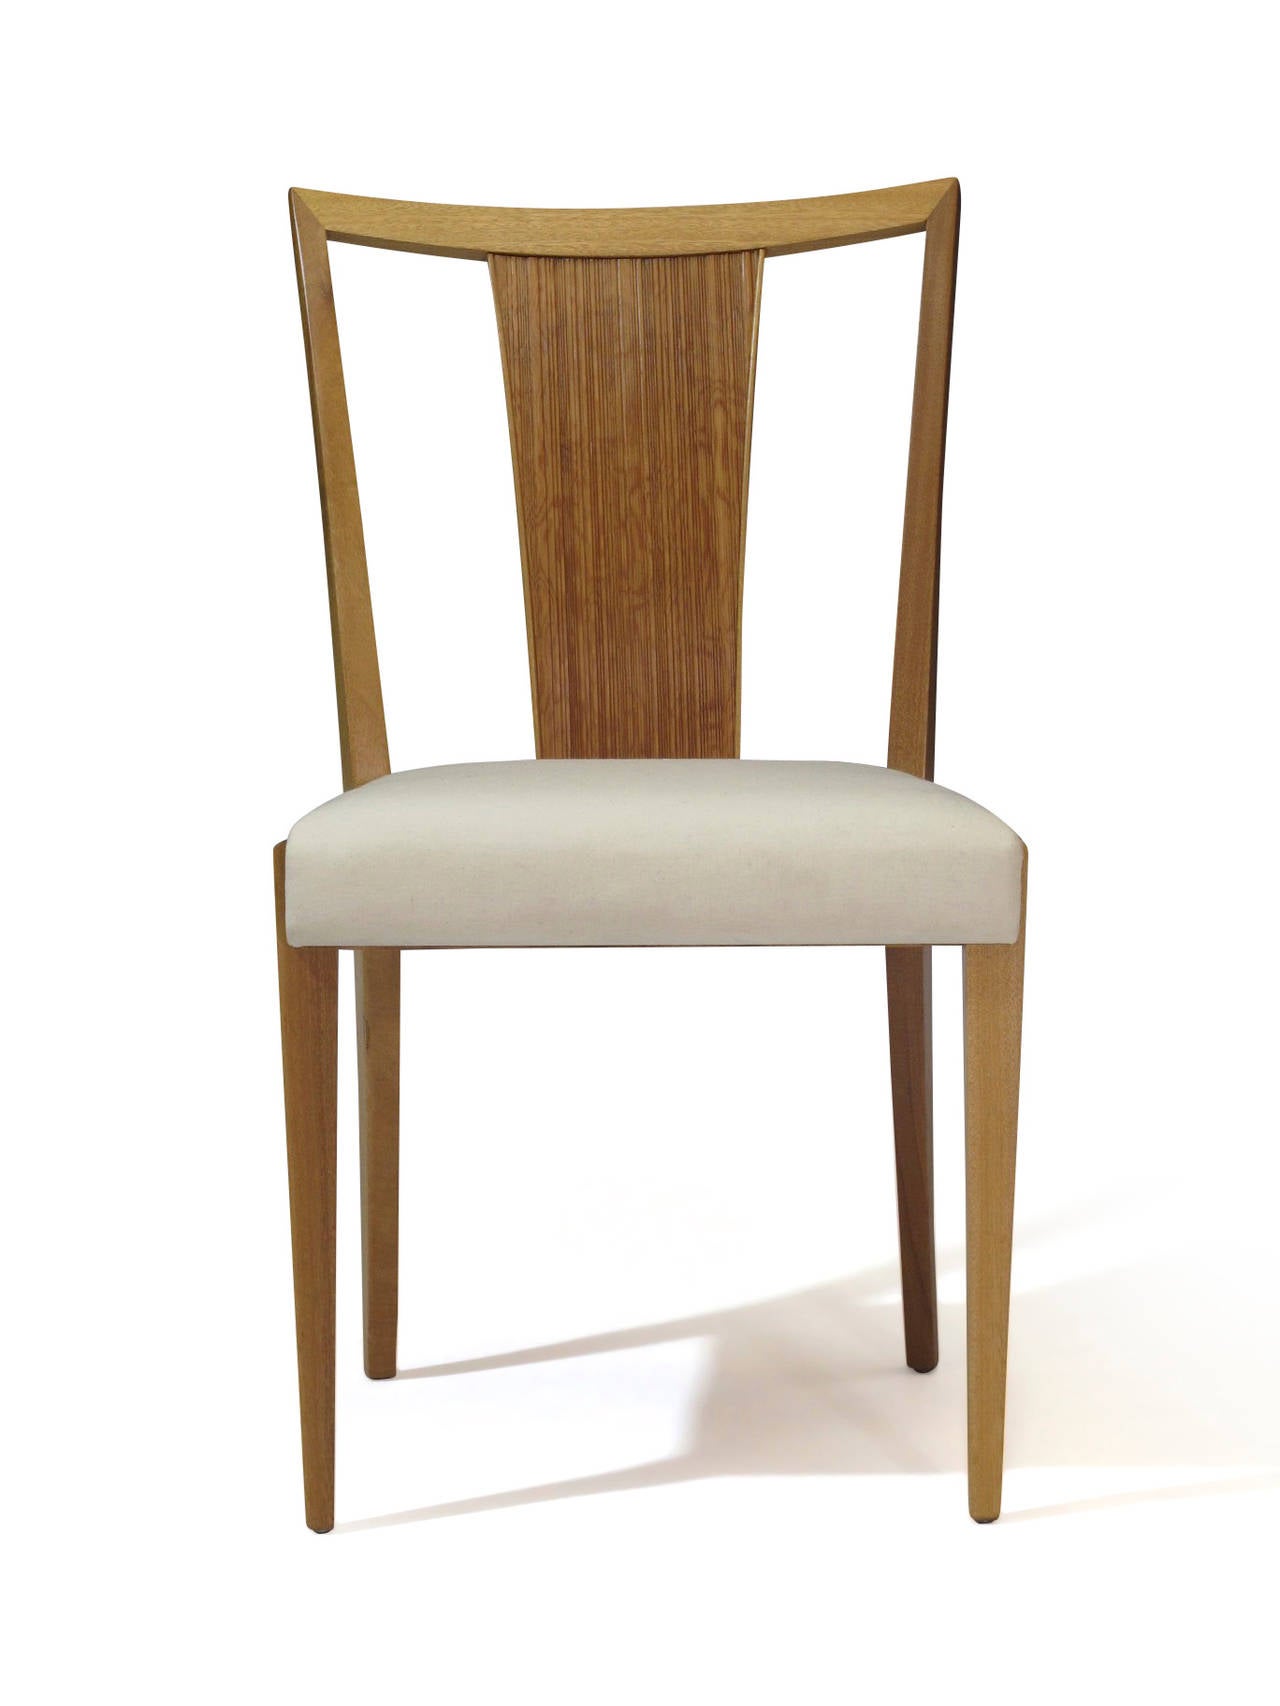 Six dining chairs designed by Paul Frankl for Brown Saltman. Blonde mahogany frame with combed fir back rest. Seats upholstered in muslin. Dining table available upon request.